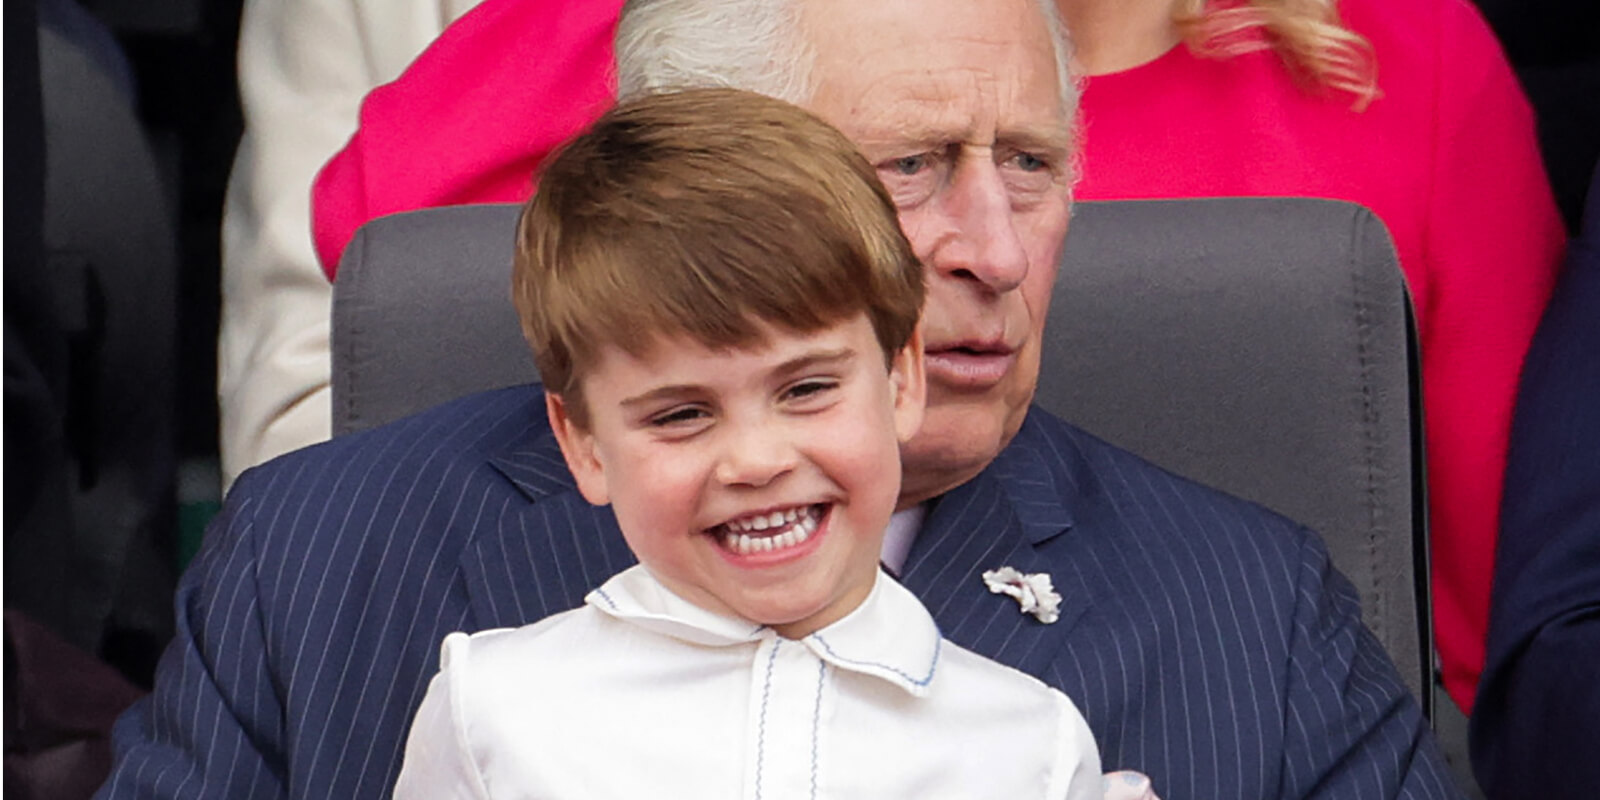 Prince Louis sits on the lap of his grandfather King Charles III during a royal event in 2022.